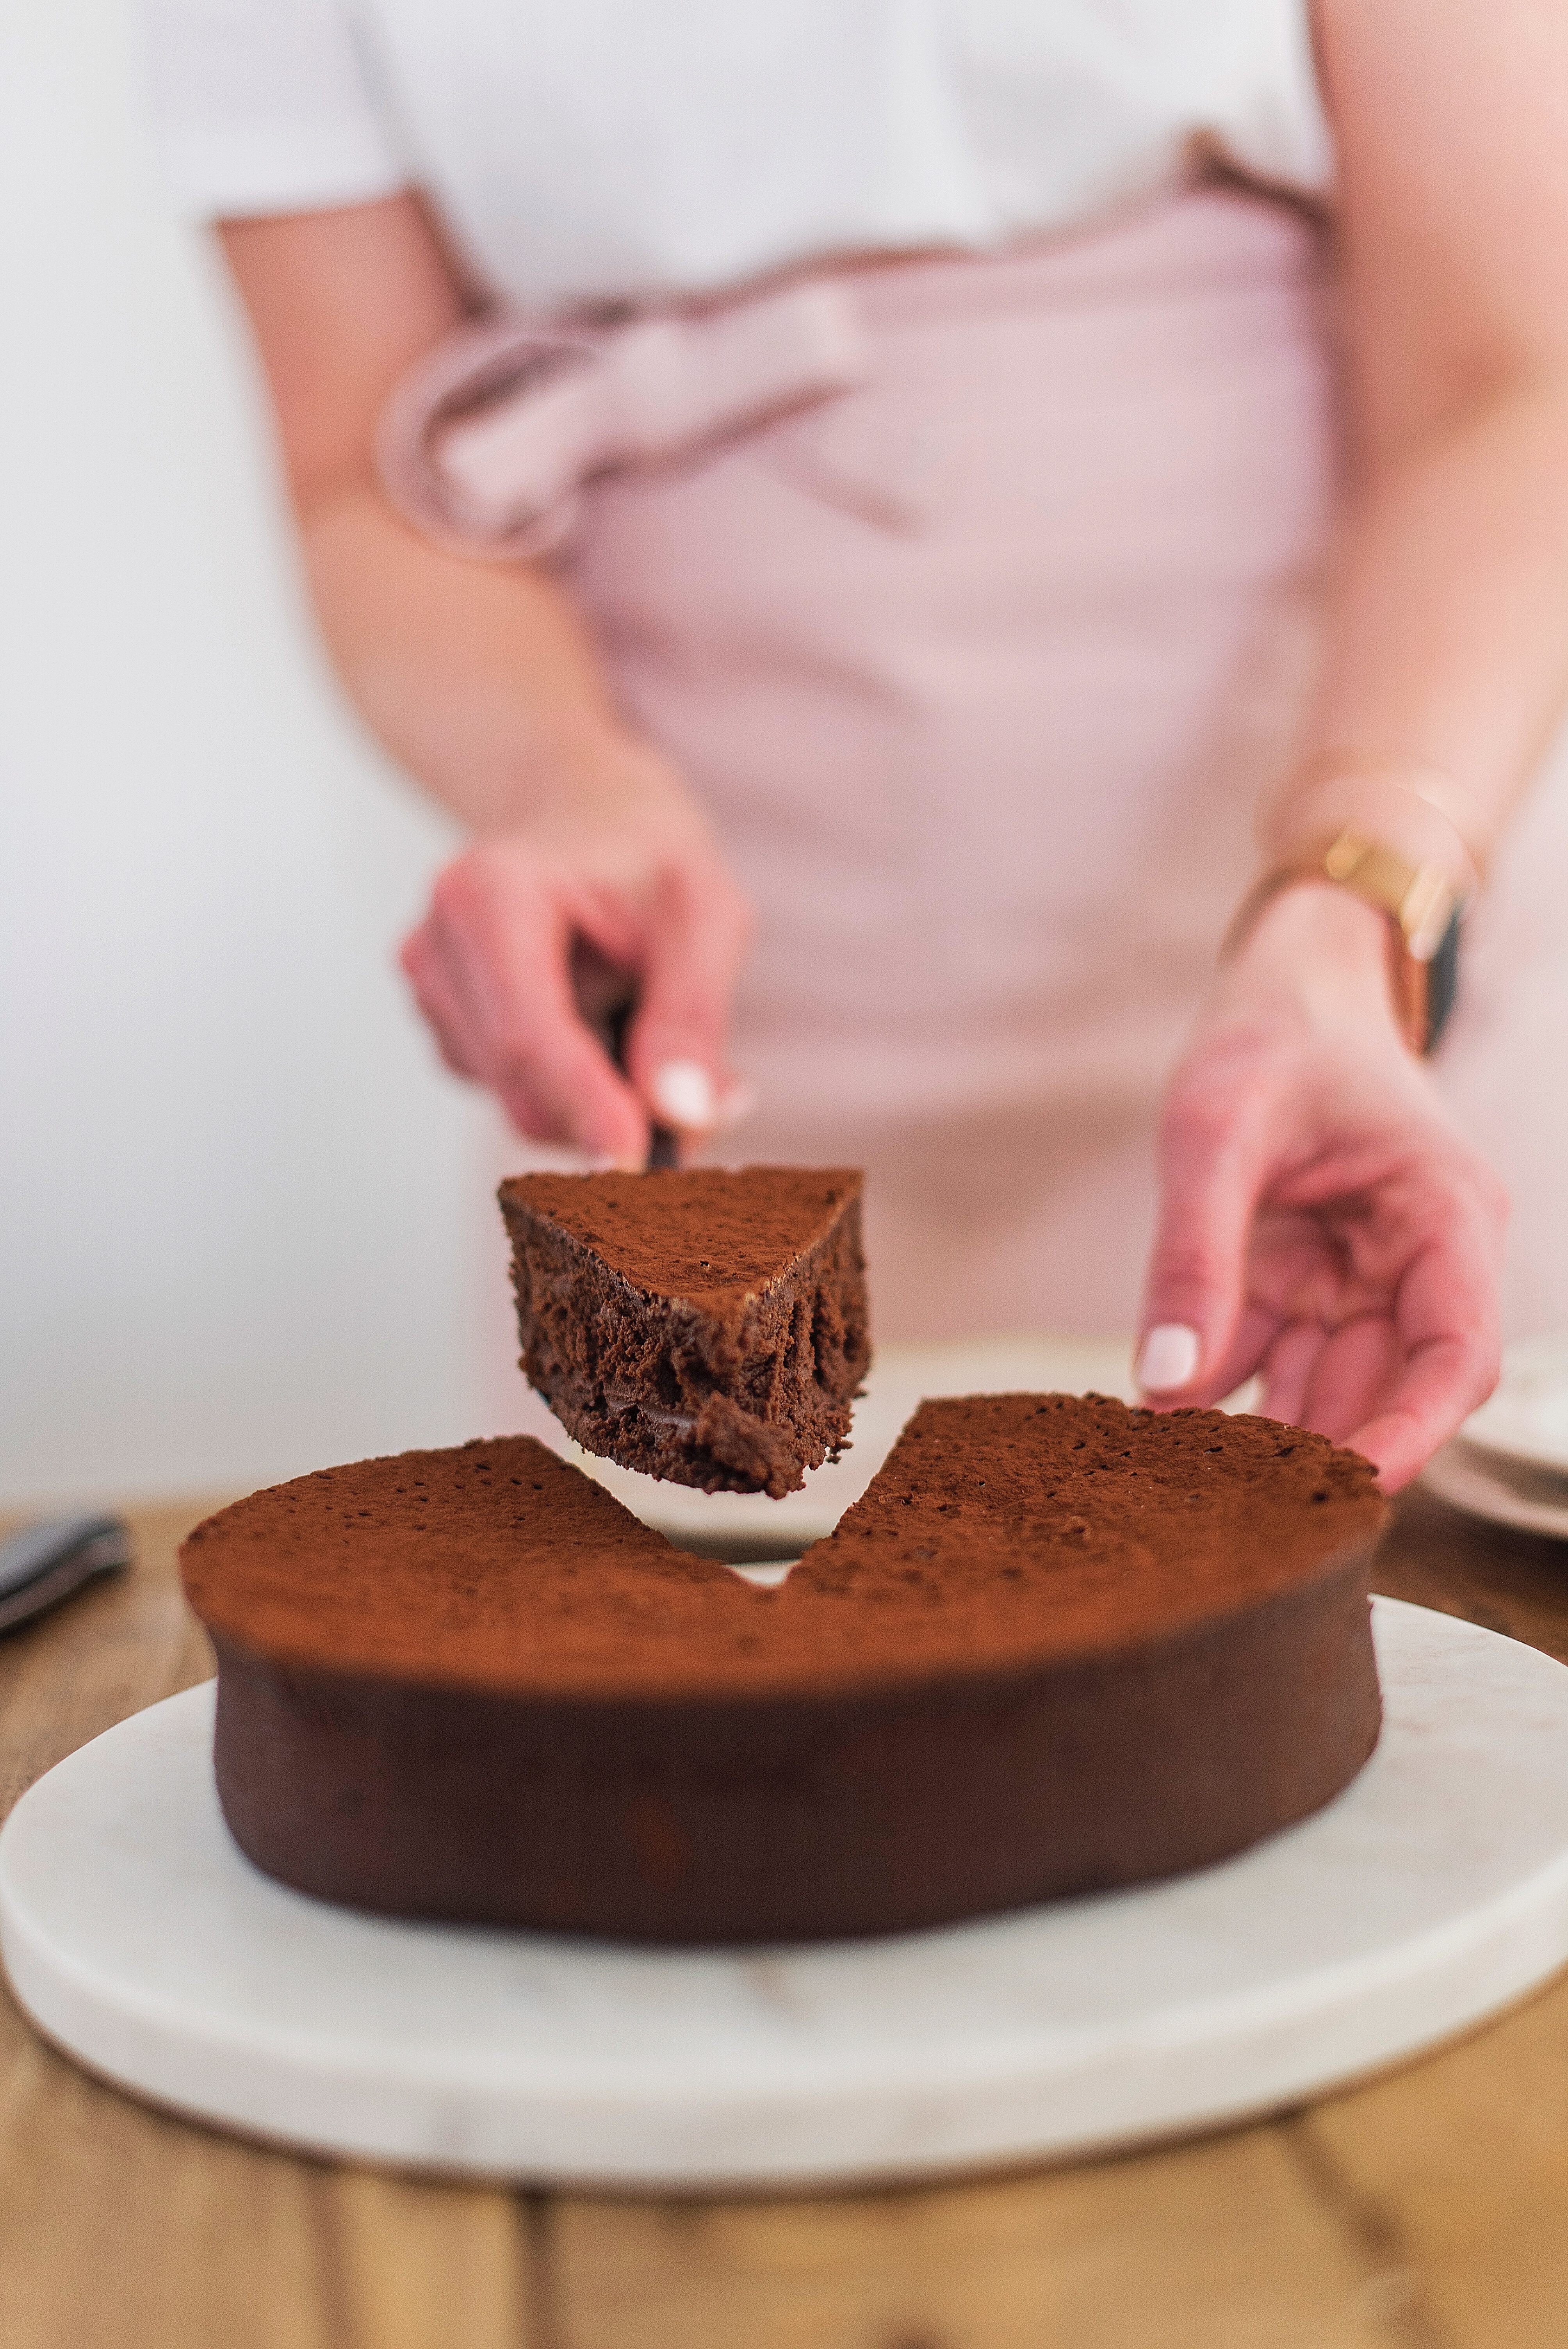 Flourless Chocolate Cake:  a rich, decadent chocolate cake, made with just 7 ingredients! #cakebycourtney #cake #flourlesschocolatecake #cakes #chocolatecake #easychocolatecakerecipe #flourlesschocolatecakerecipe